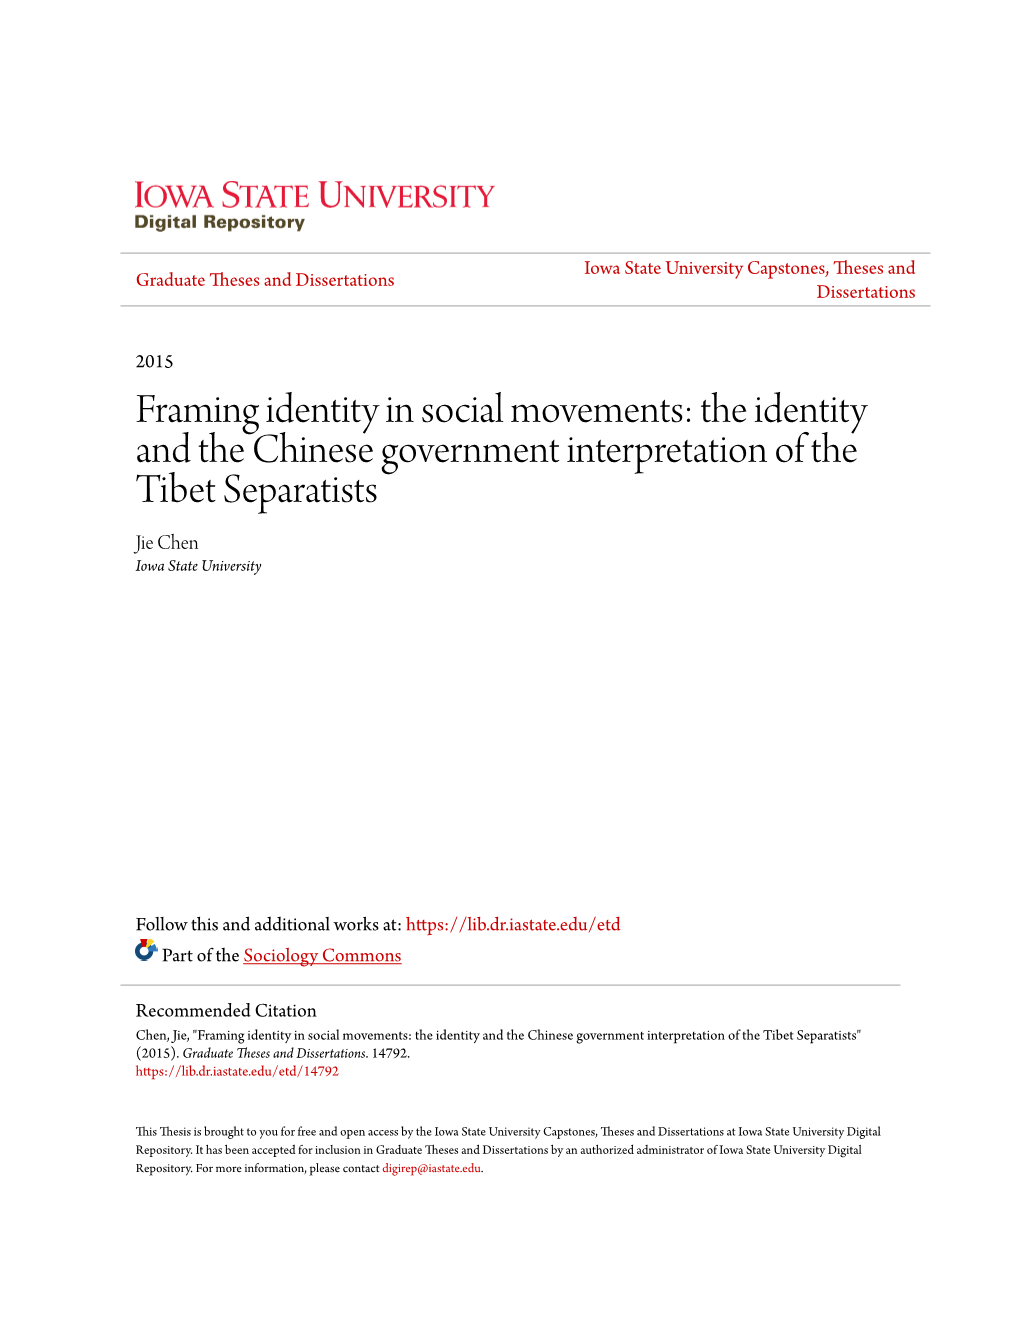 Framing Identity in Social Movements: the Identity and the Chinese Government Interpretation of the Tibet Separatists Jie Chen Iowa State University